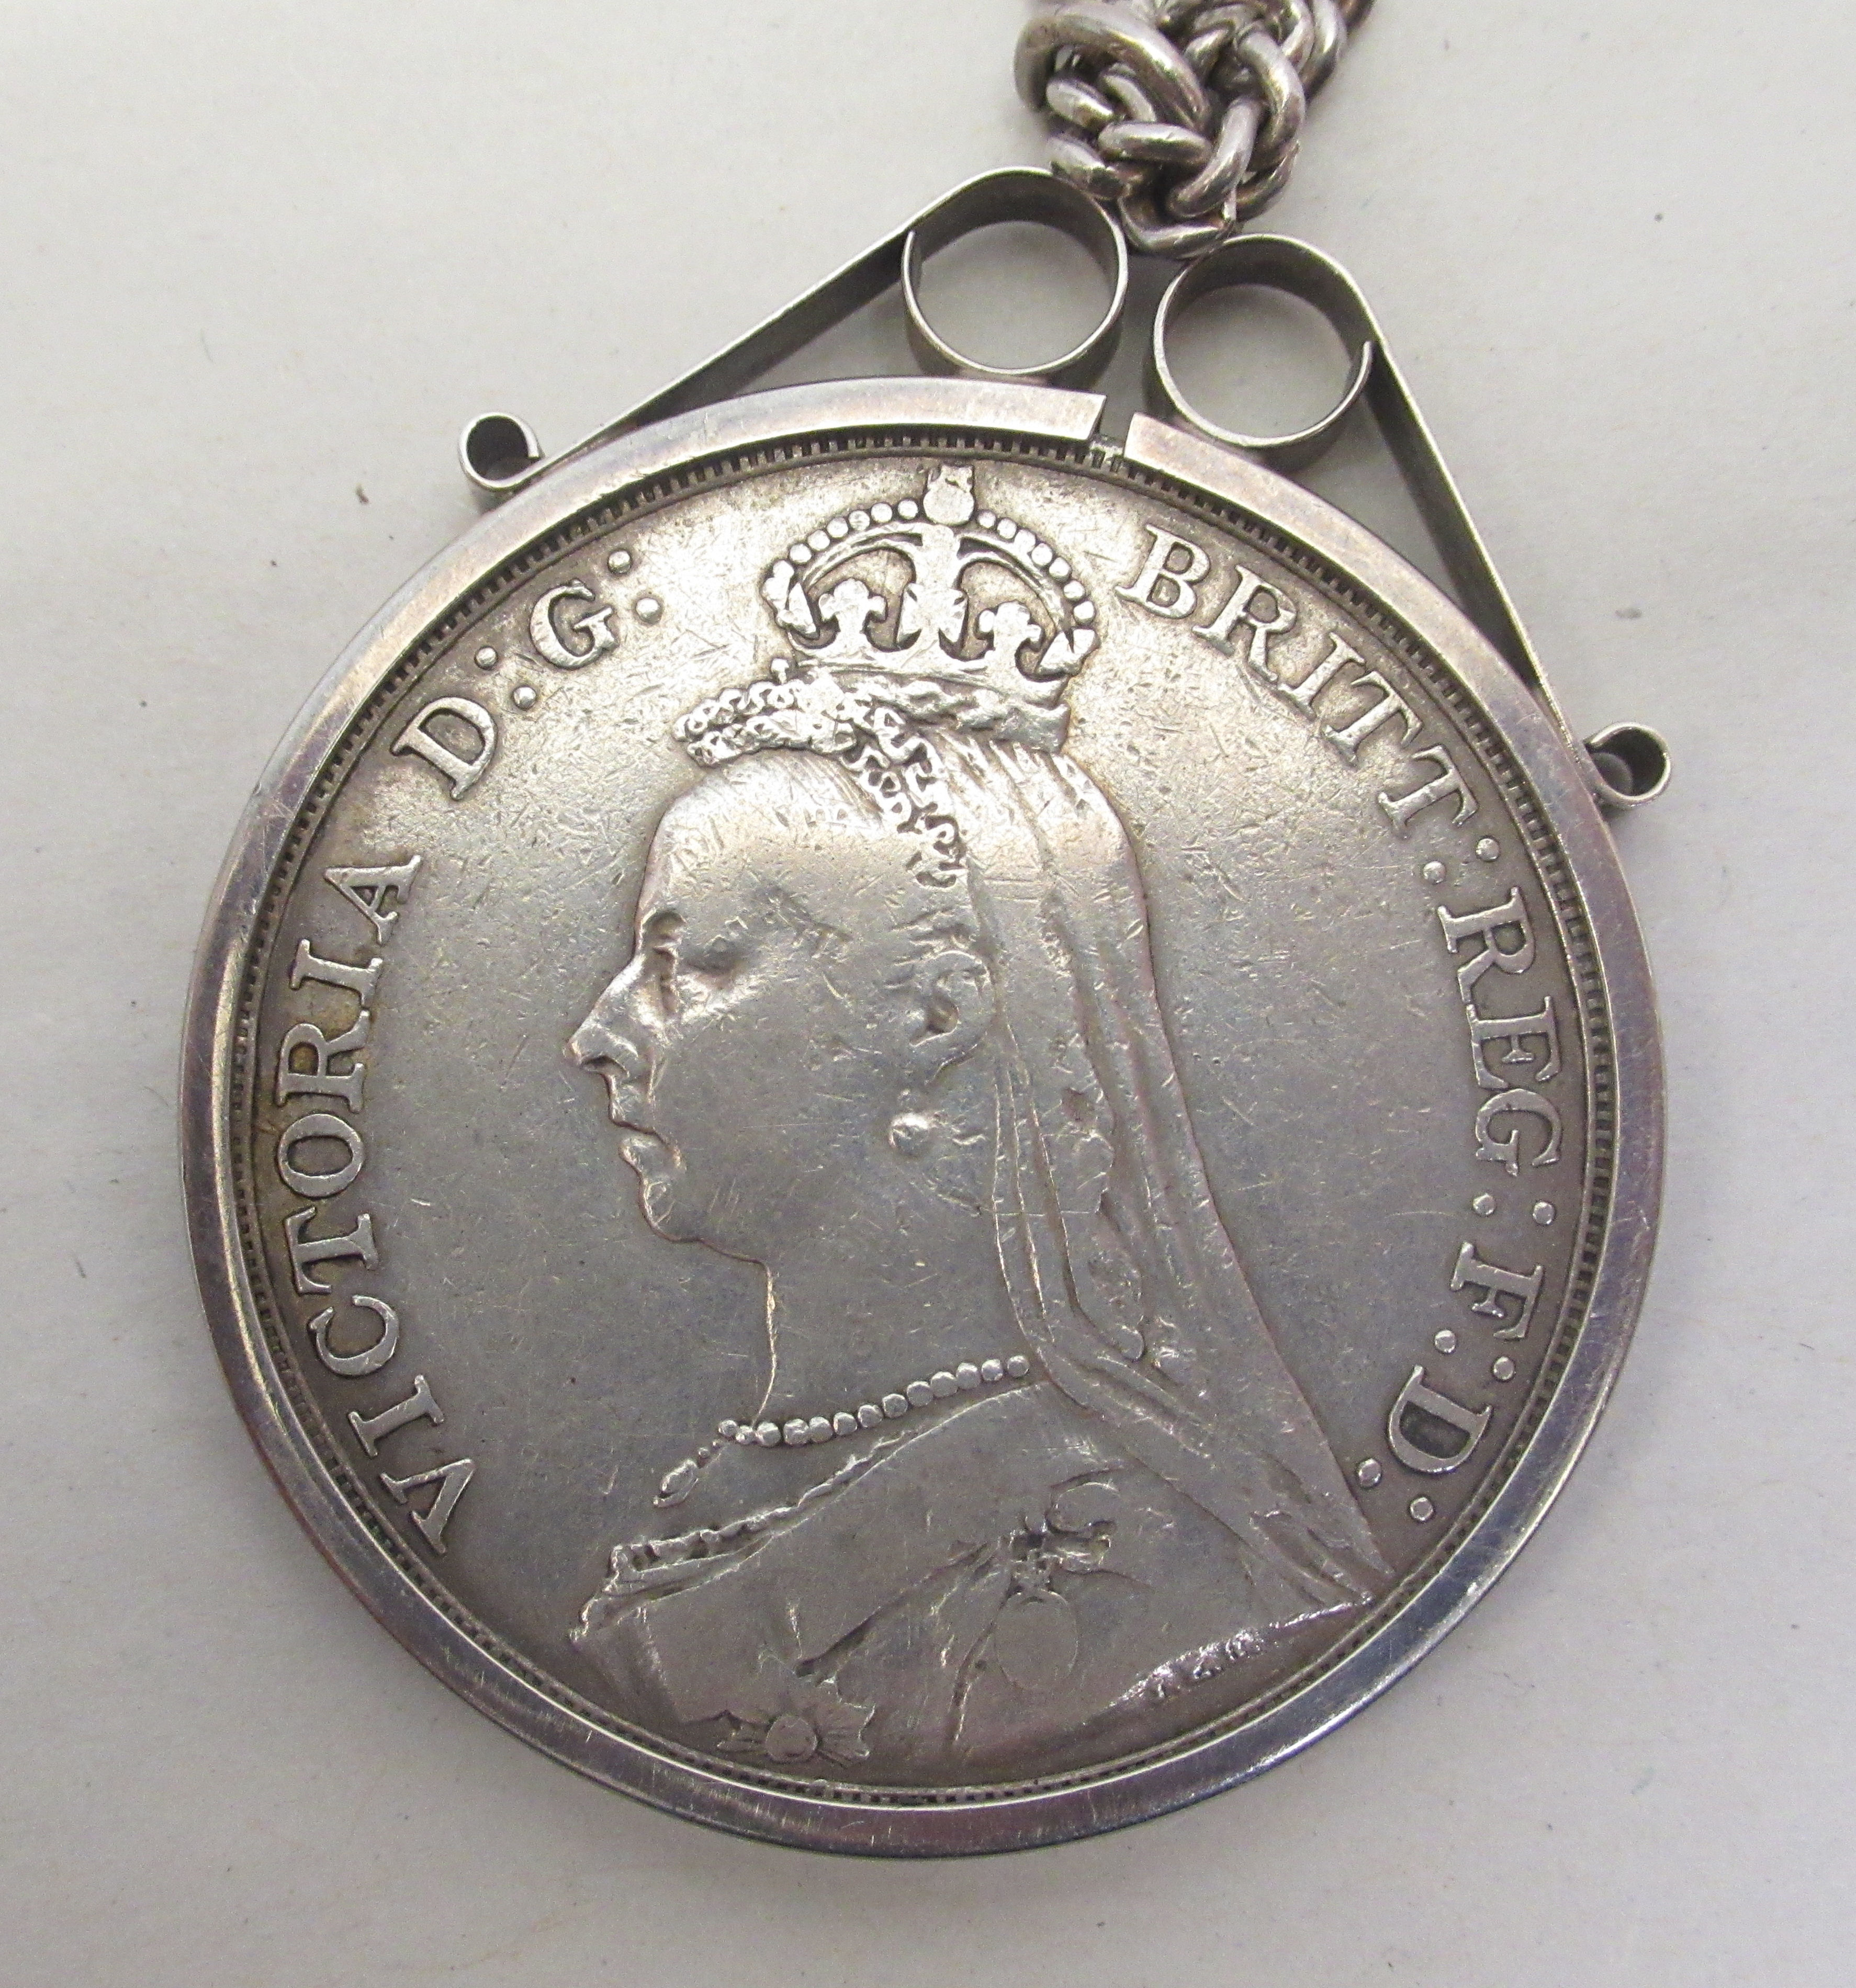 A George IV crown  1821; a Victorian crown  1891, in a silver mount, on a fine neckchain; and a - Image 5 of 5